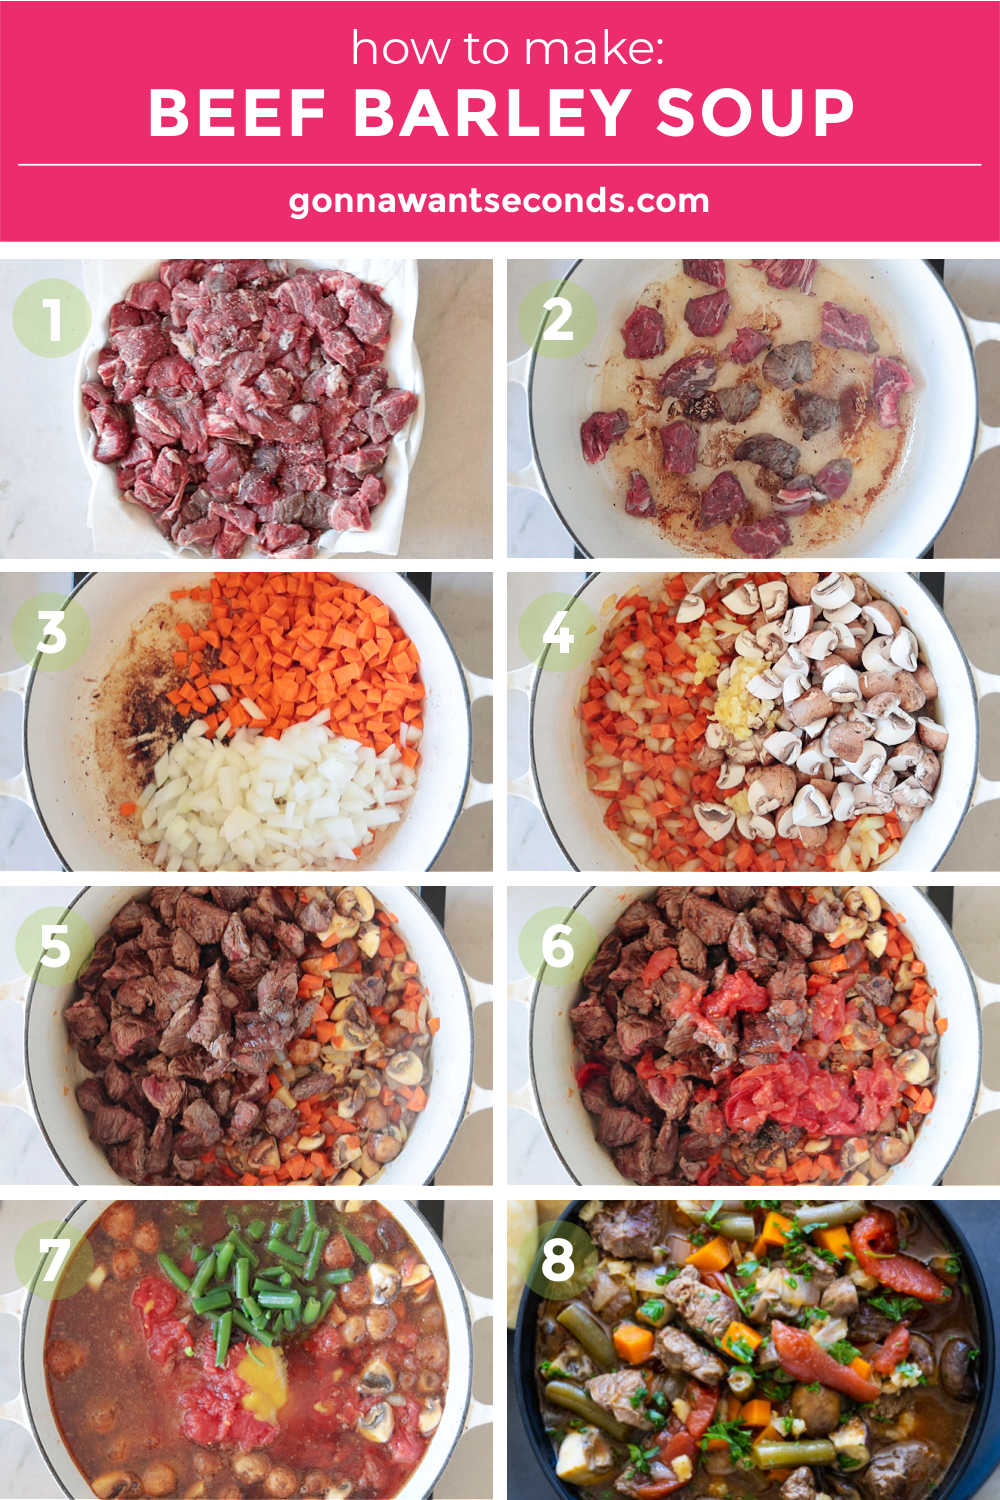 Step by step how to make beef barley soup